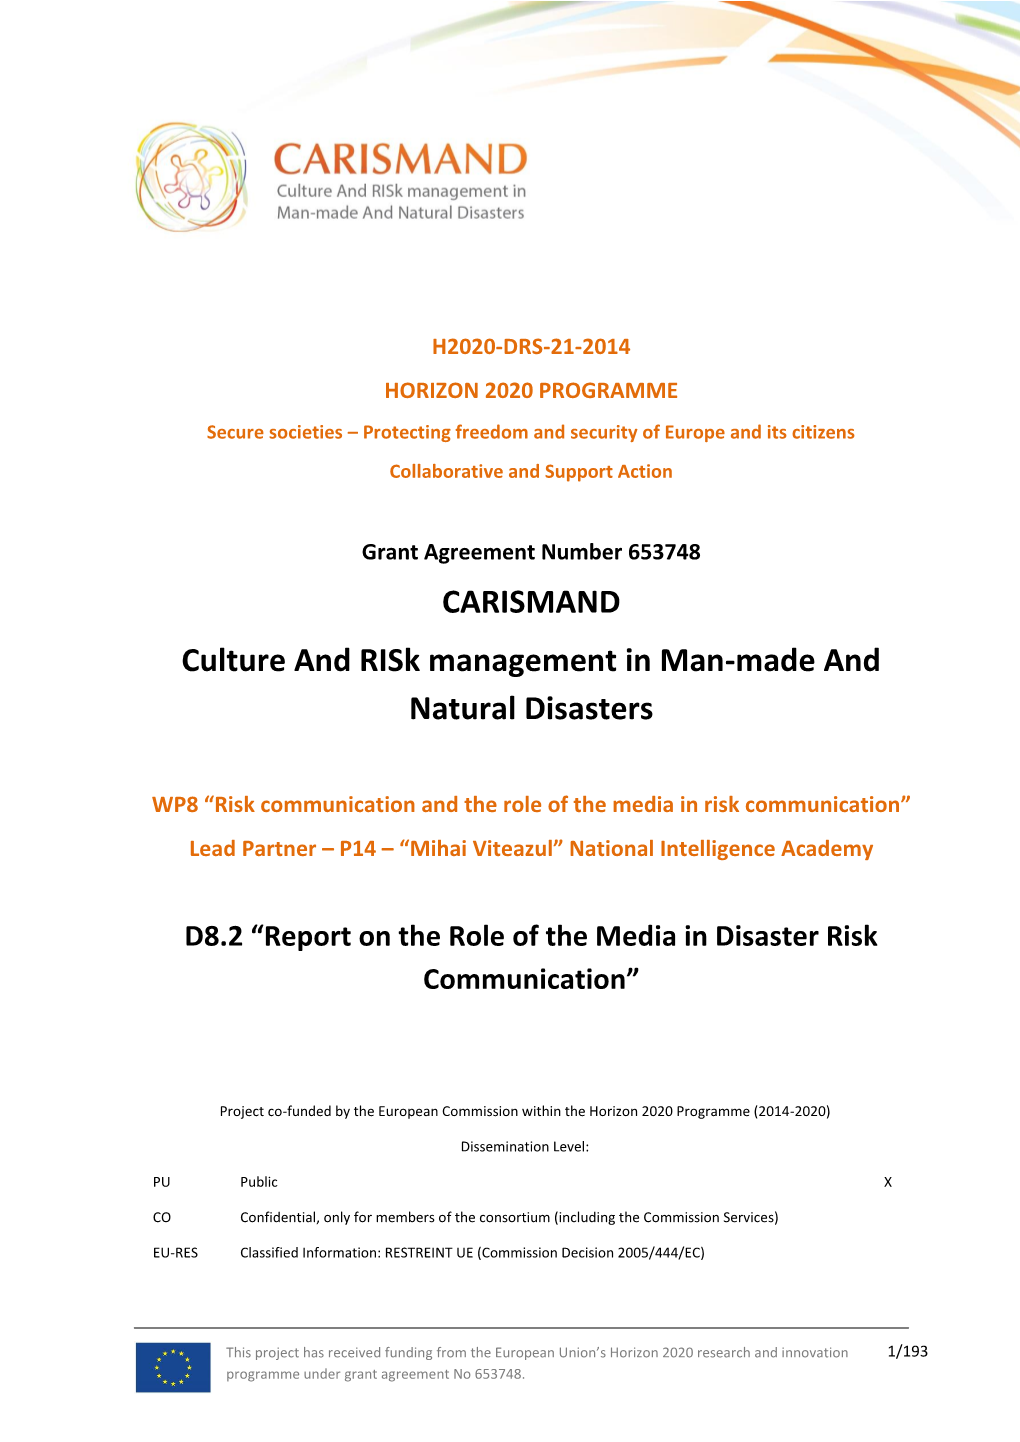 CARISMAND Culture and Risk Management in Man-Made and Natural Disasters